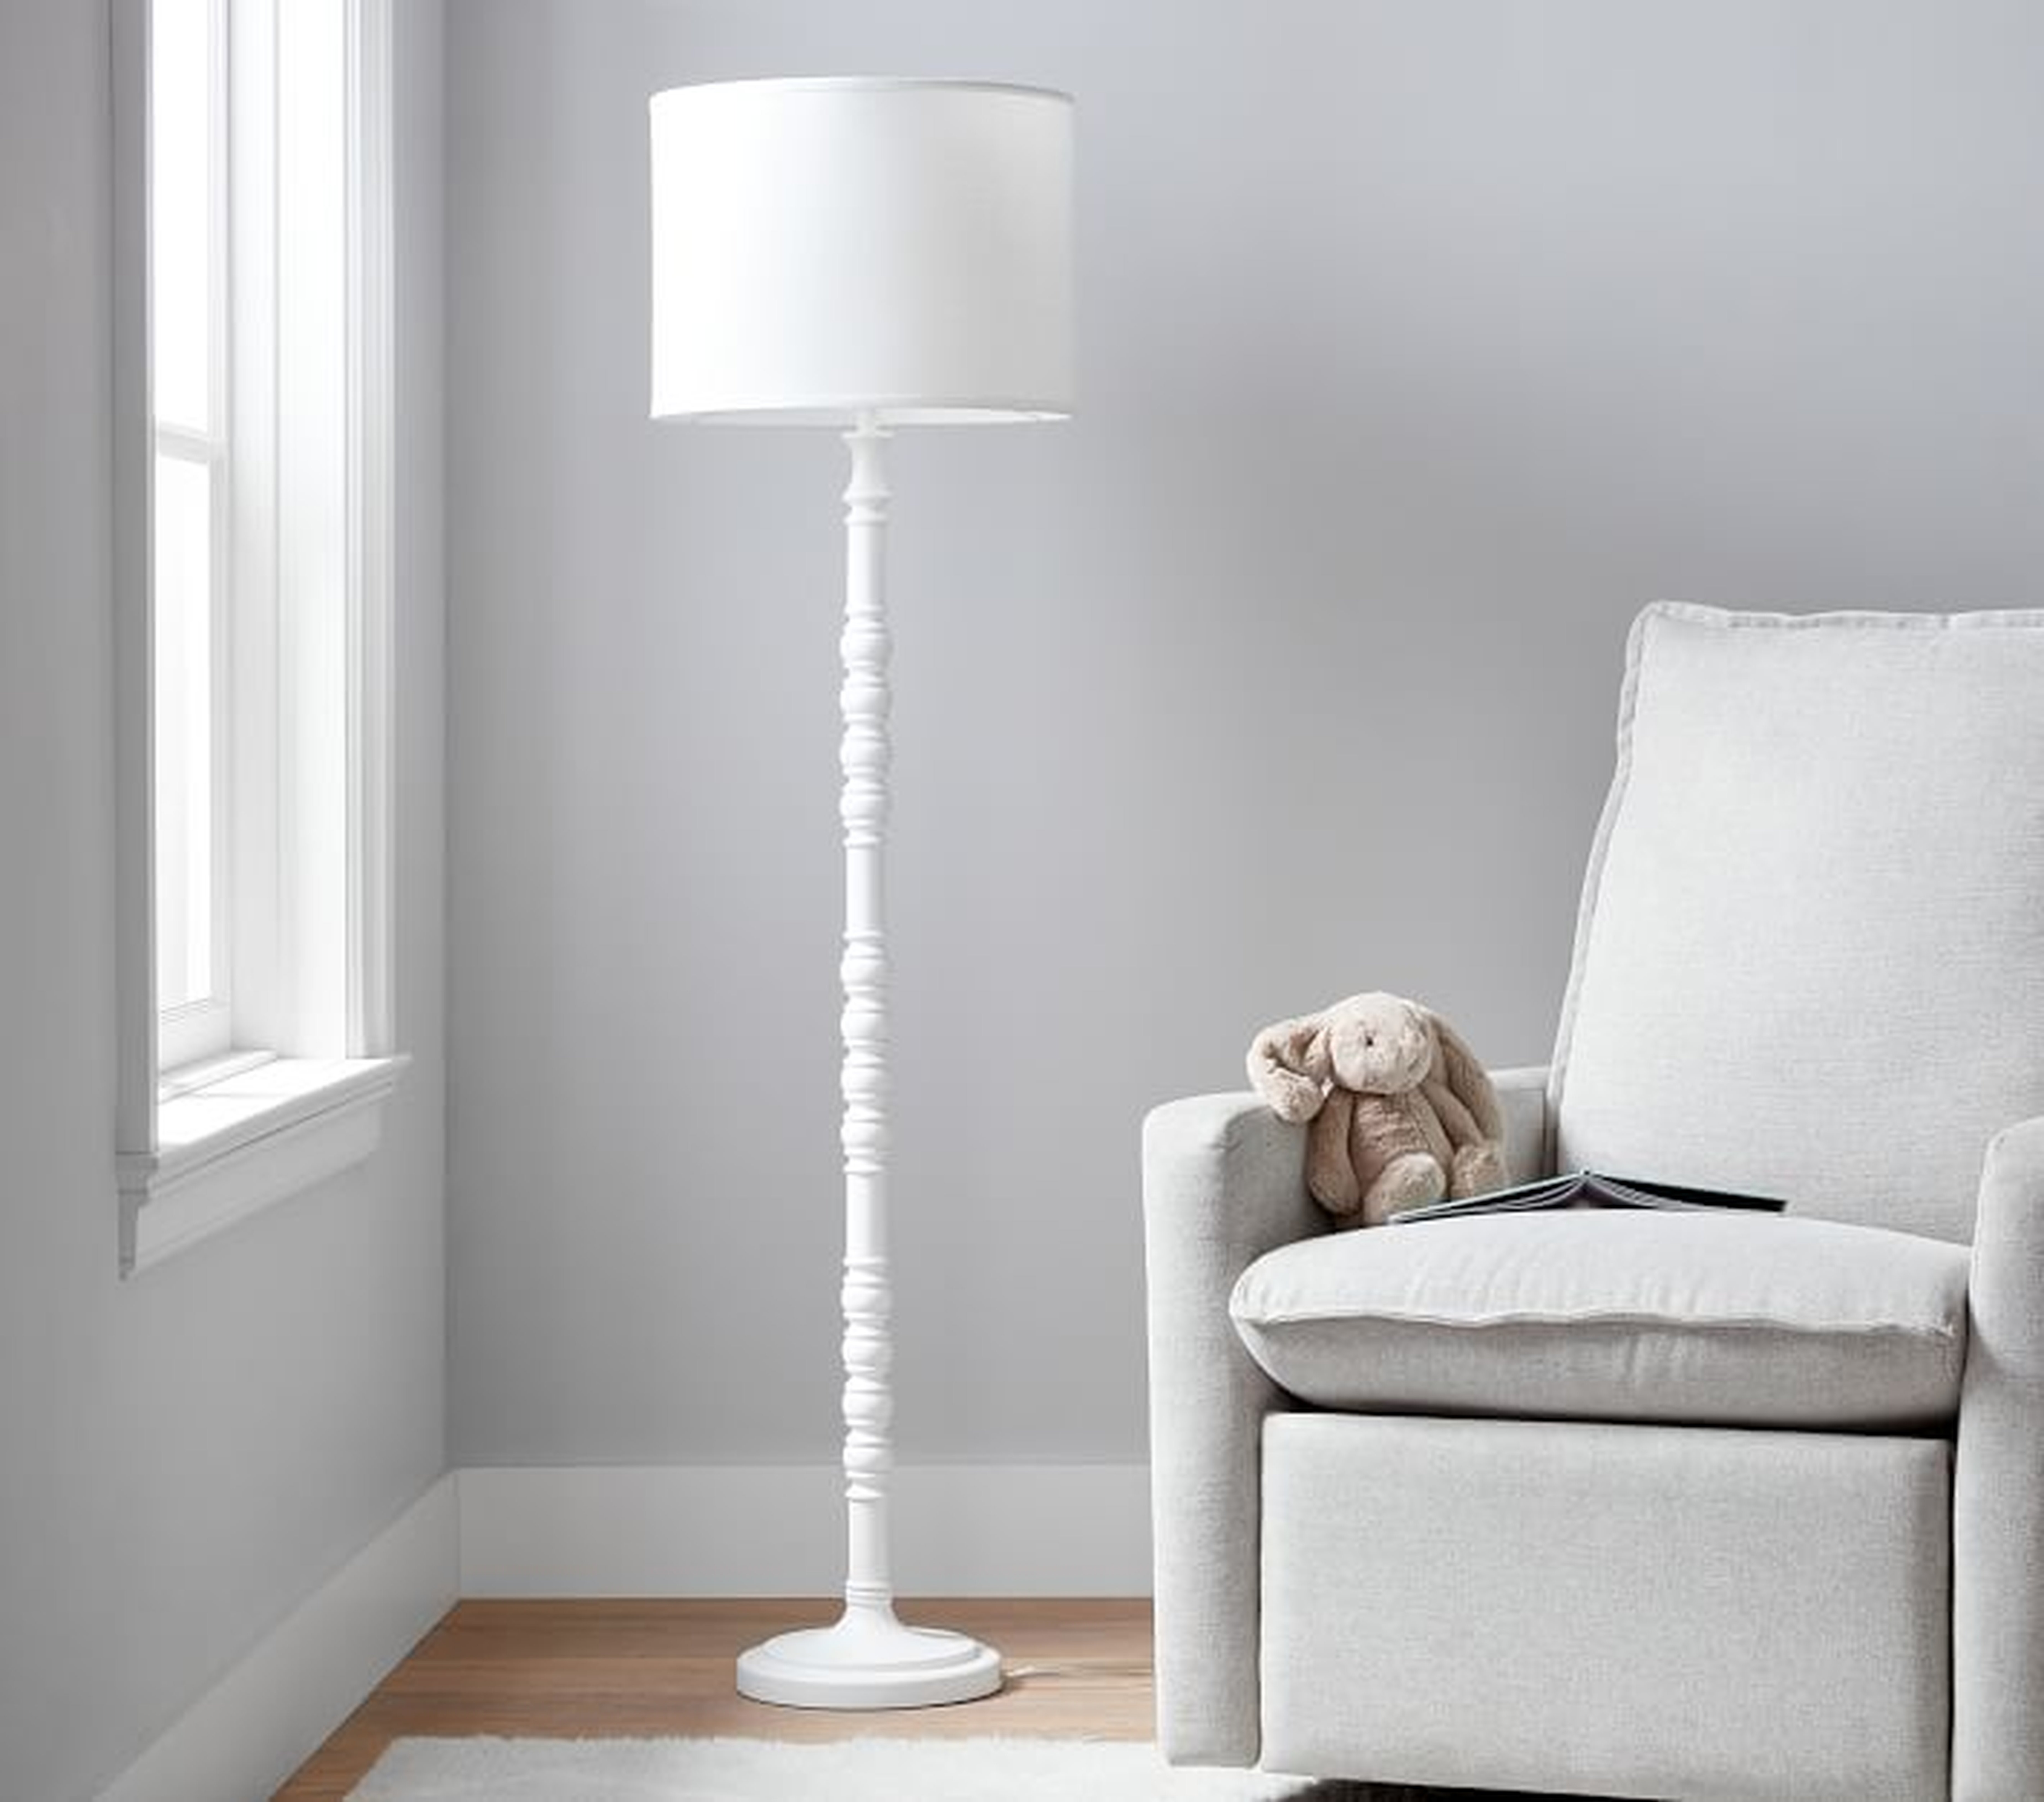 Layla Spindle Floor Lamp - Pottery Barn Kids